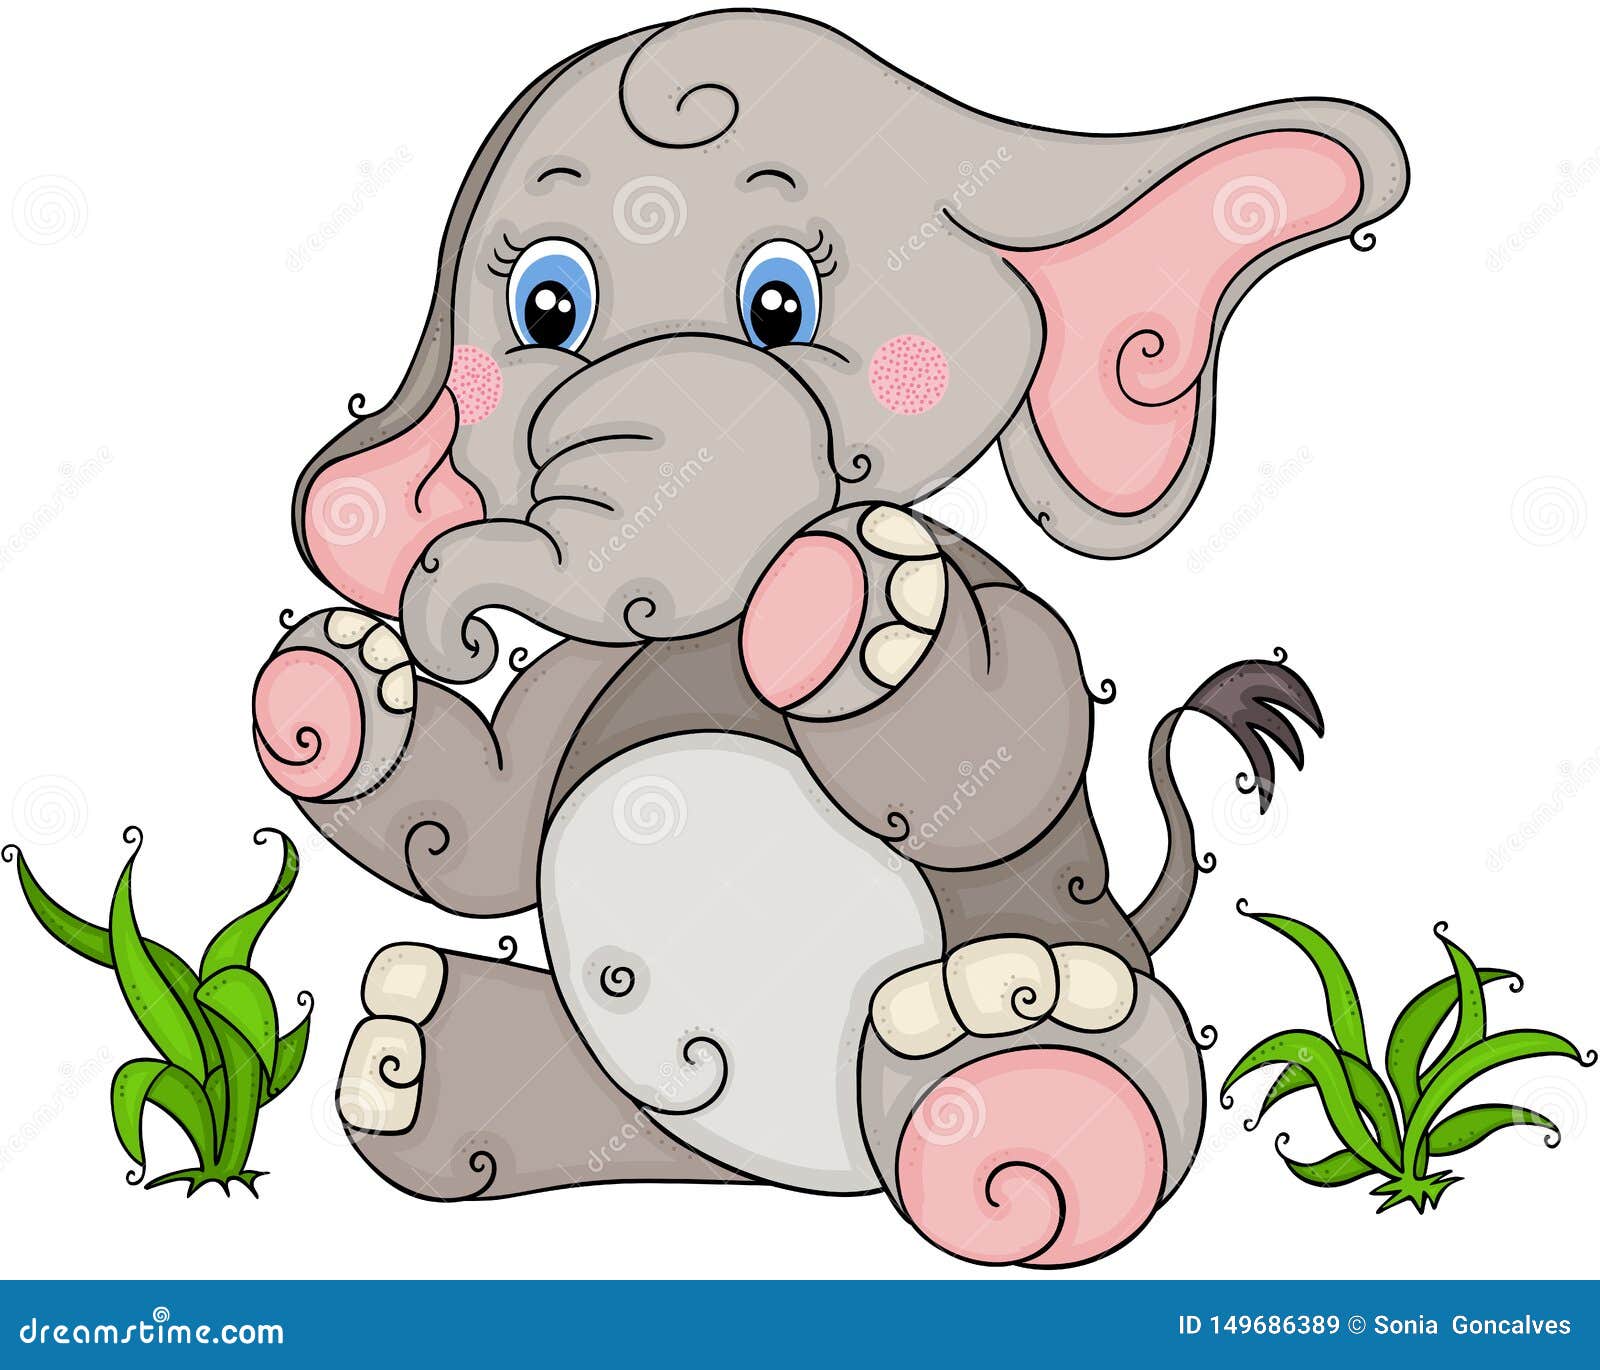 Cute Baby Elephant Sitting On Grass Stock Vector ...